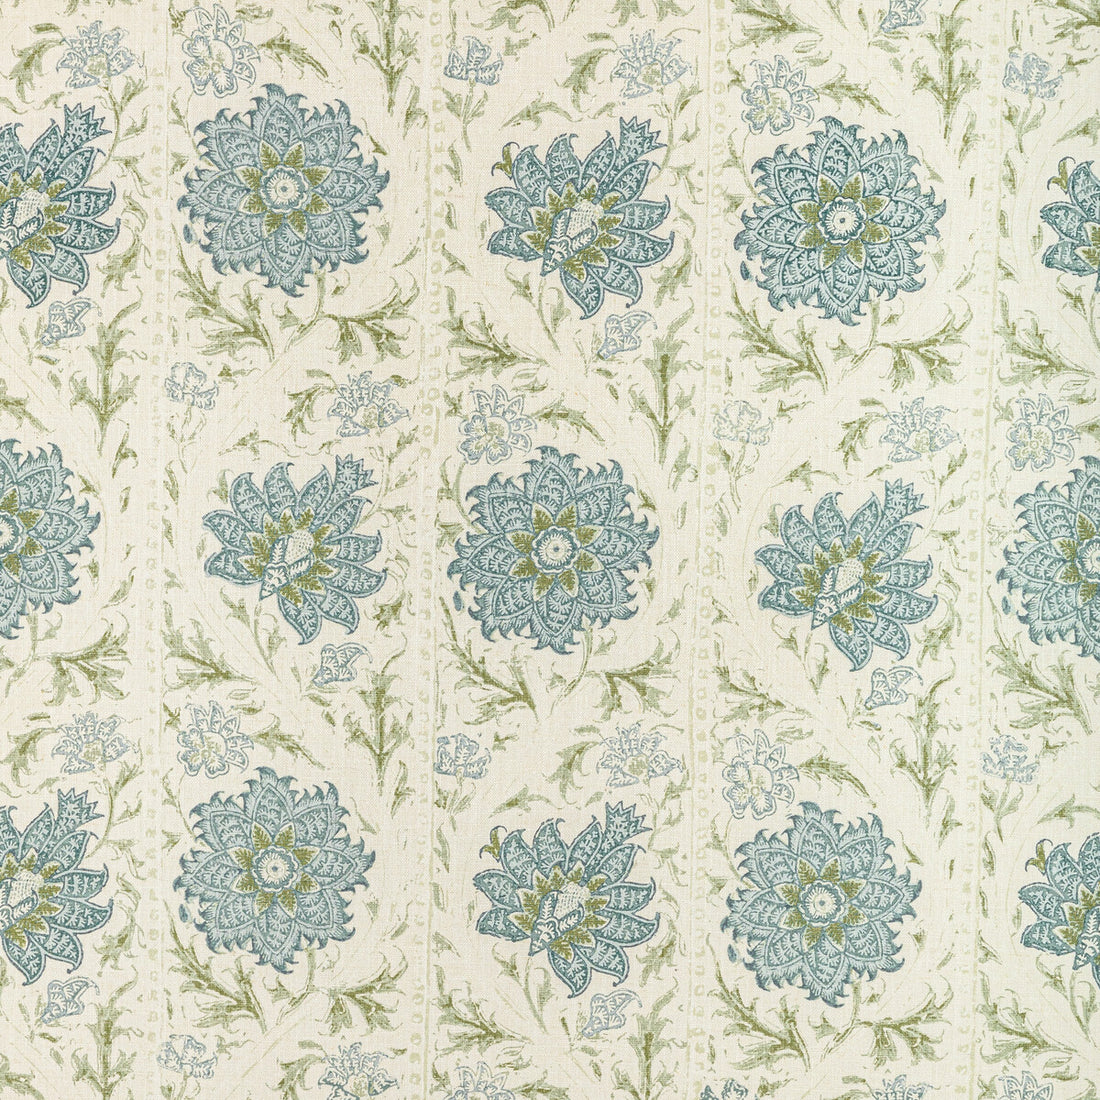 Calico Vine fabric in green blue color - pattern 2022102.530.0 - by Lee Jofa in the Sarah Bartholomew collection